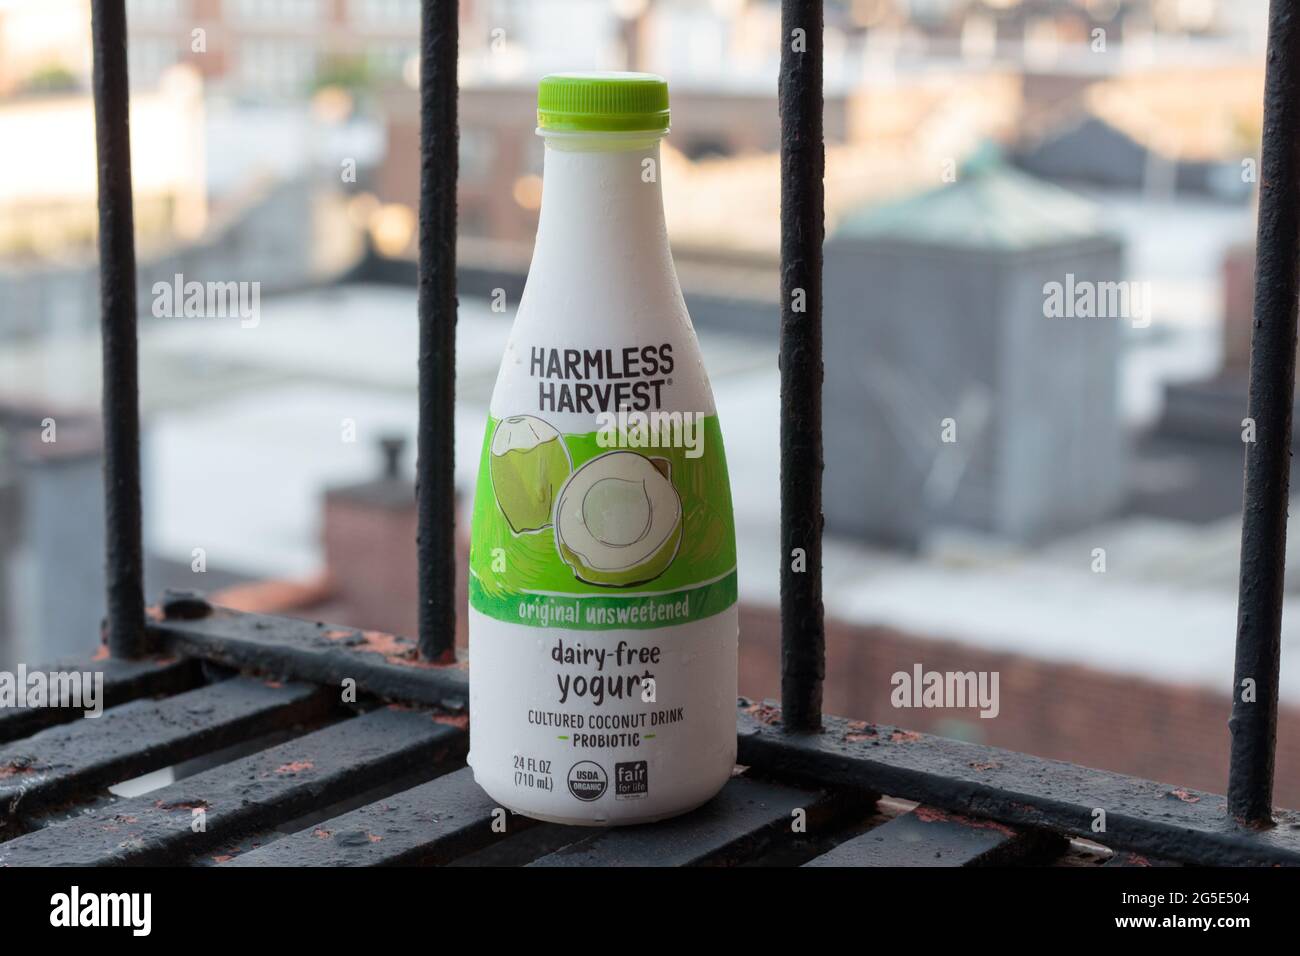 bottle of Harmless Harvest brand original, unsweetened, organic dairy-free drinkable yogurt, probiotic cultured coconut milk, on a fire escape Stock Photo